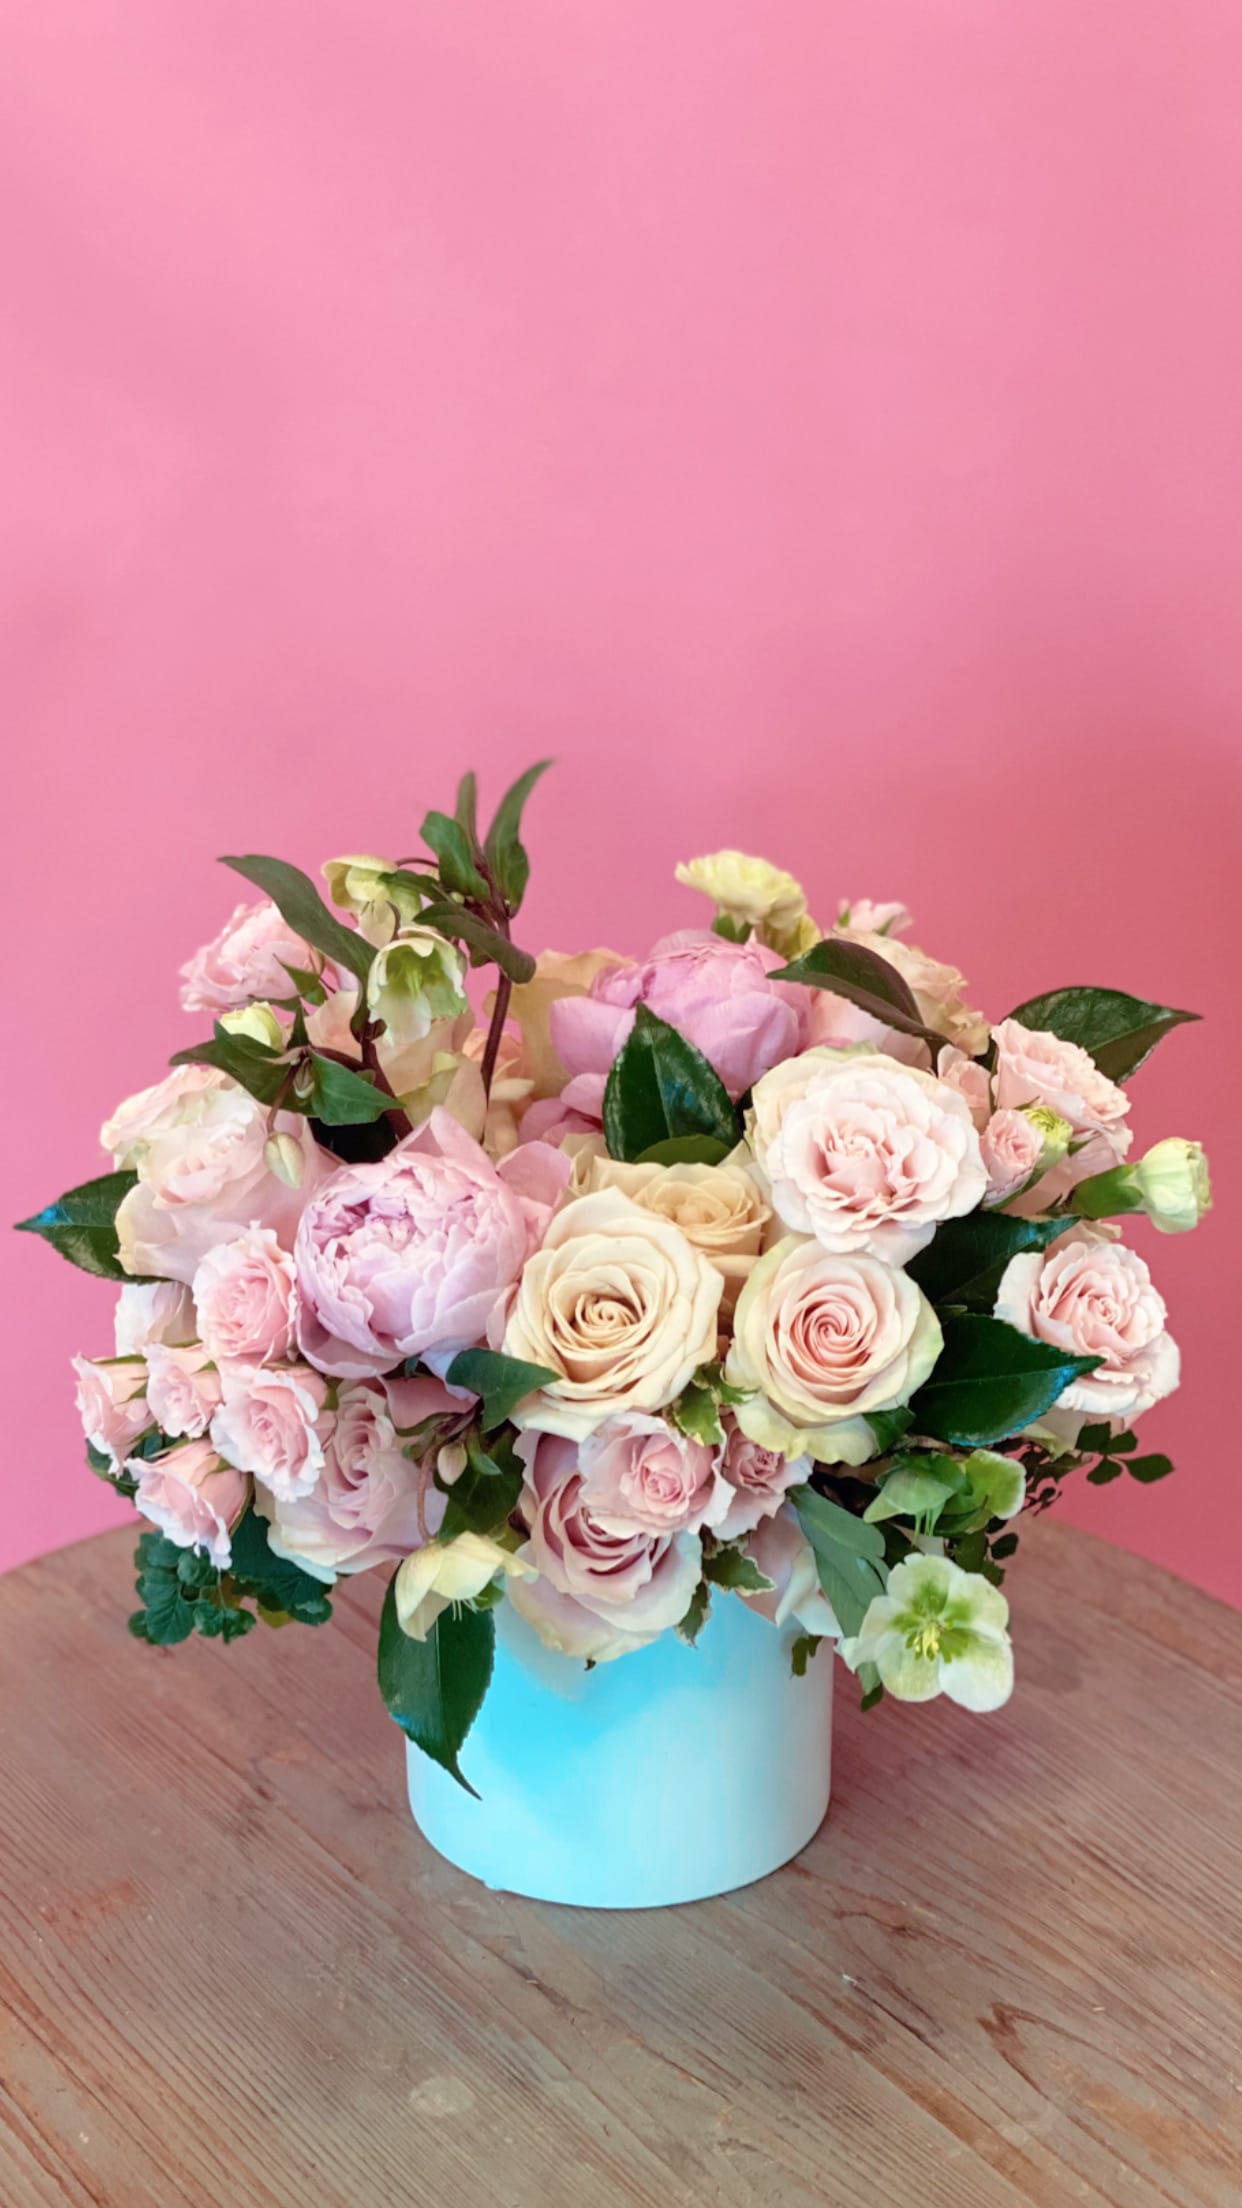 Ballerina - Ballerina got her name for being the most graceful arrangement. Delicate, baby pink hued, and filled with premium blooms- Peonies, Roses, and Hellebores with touches of greens. 